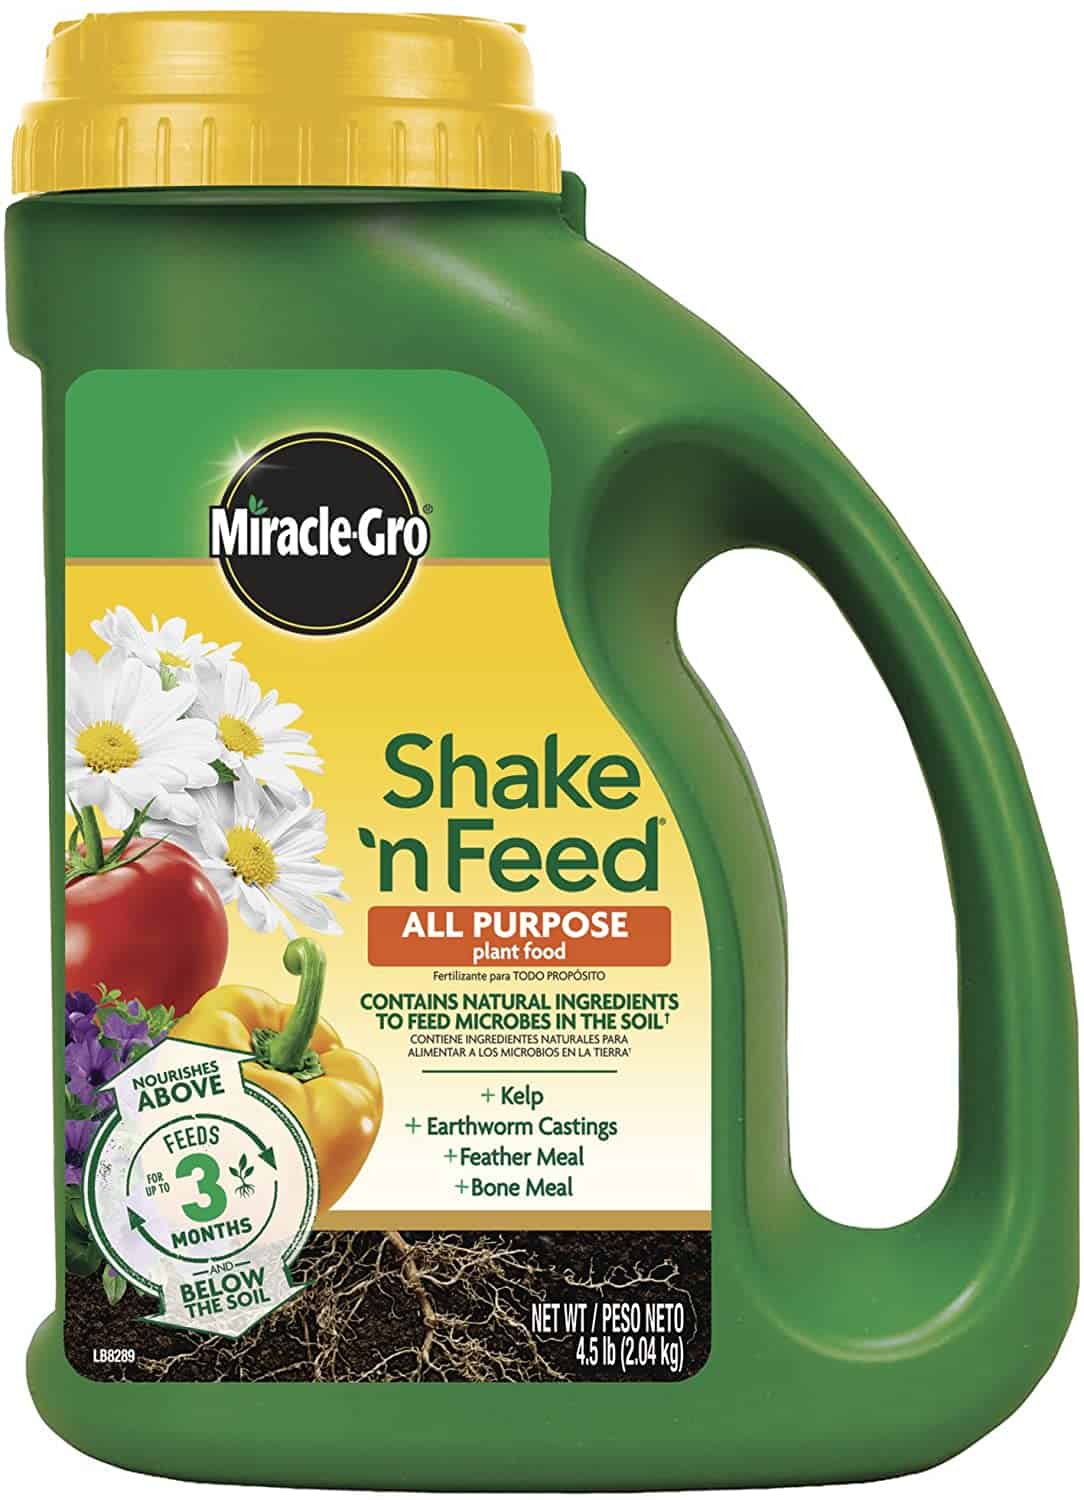 Miracle-Gro Shake 'N Feed All Purpose Plant Food, 4.5 lbs, Covers up to 180 sq. ft.